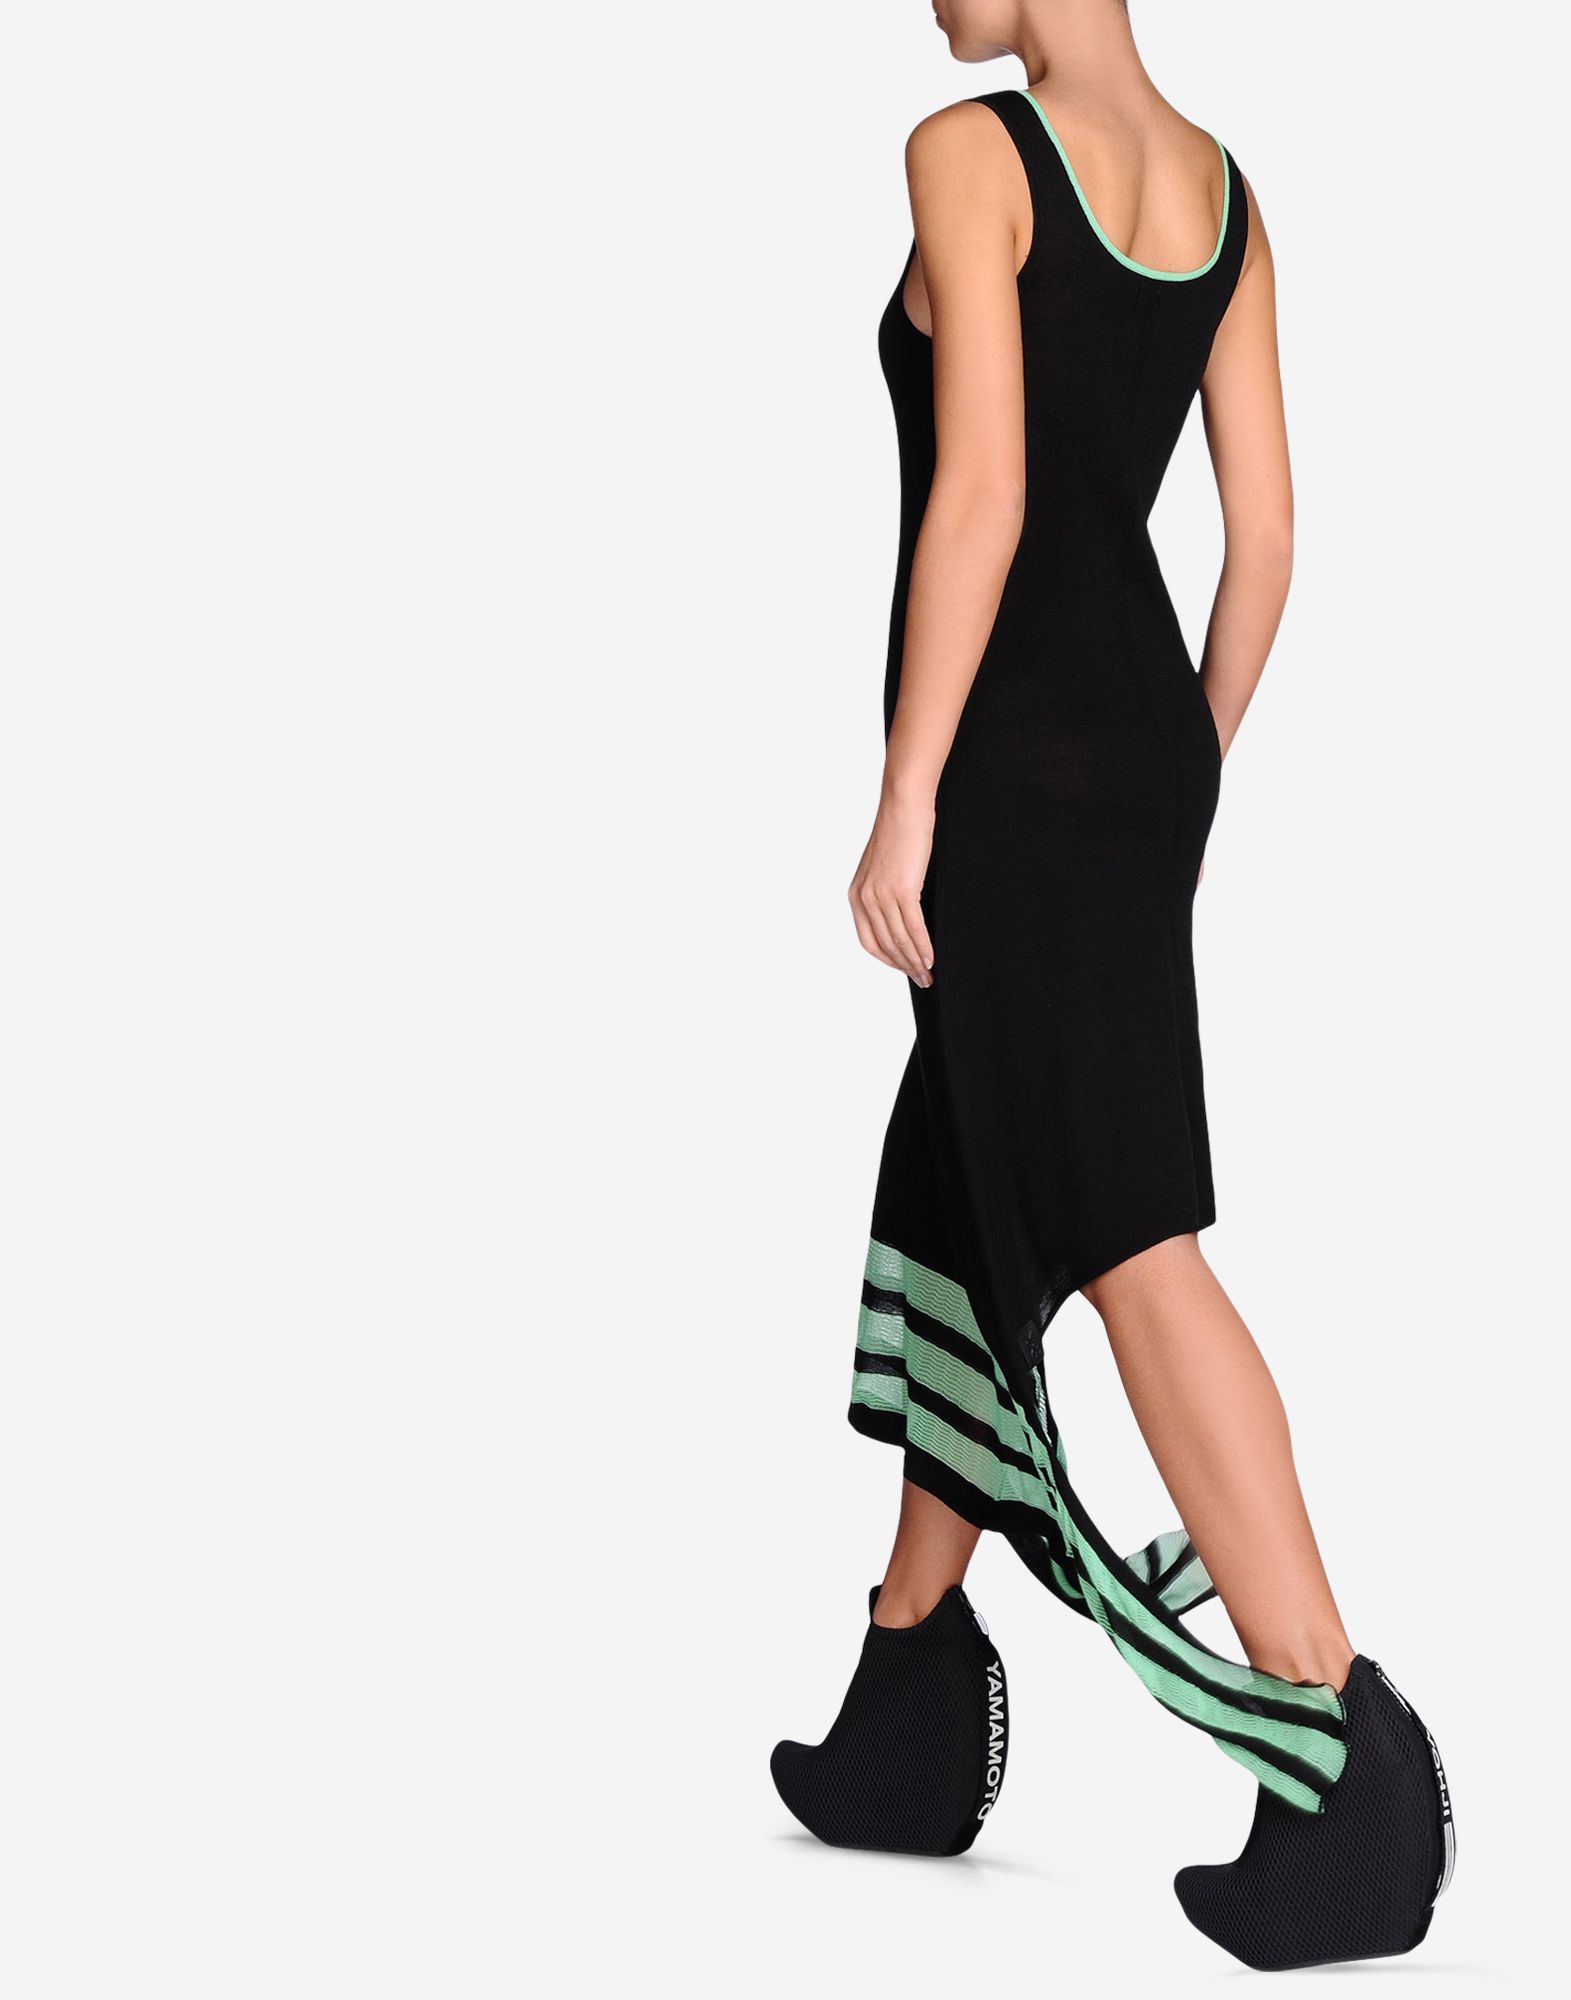 Y 3 3 Stripes Knit Dress for Women | Adidas Y-3 Official Store